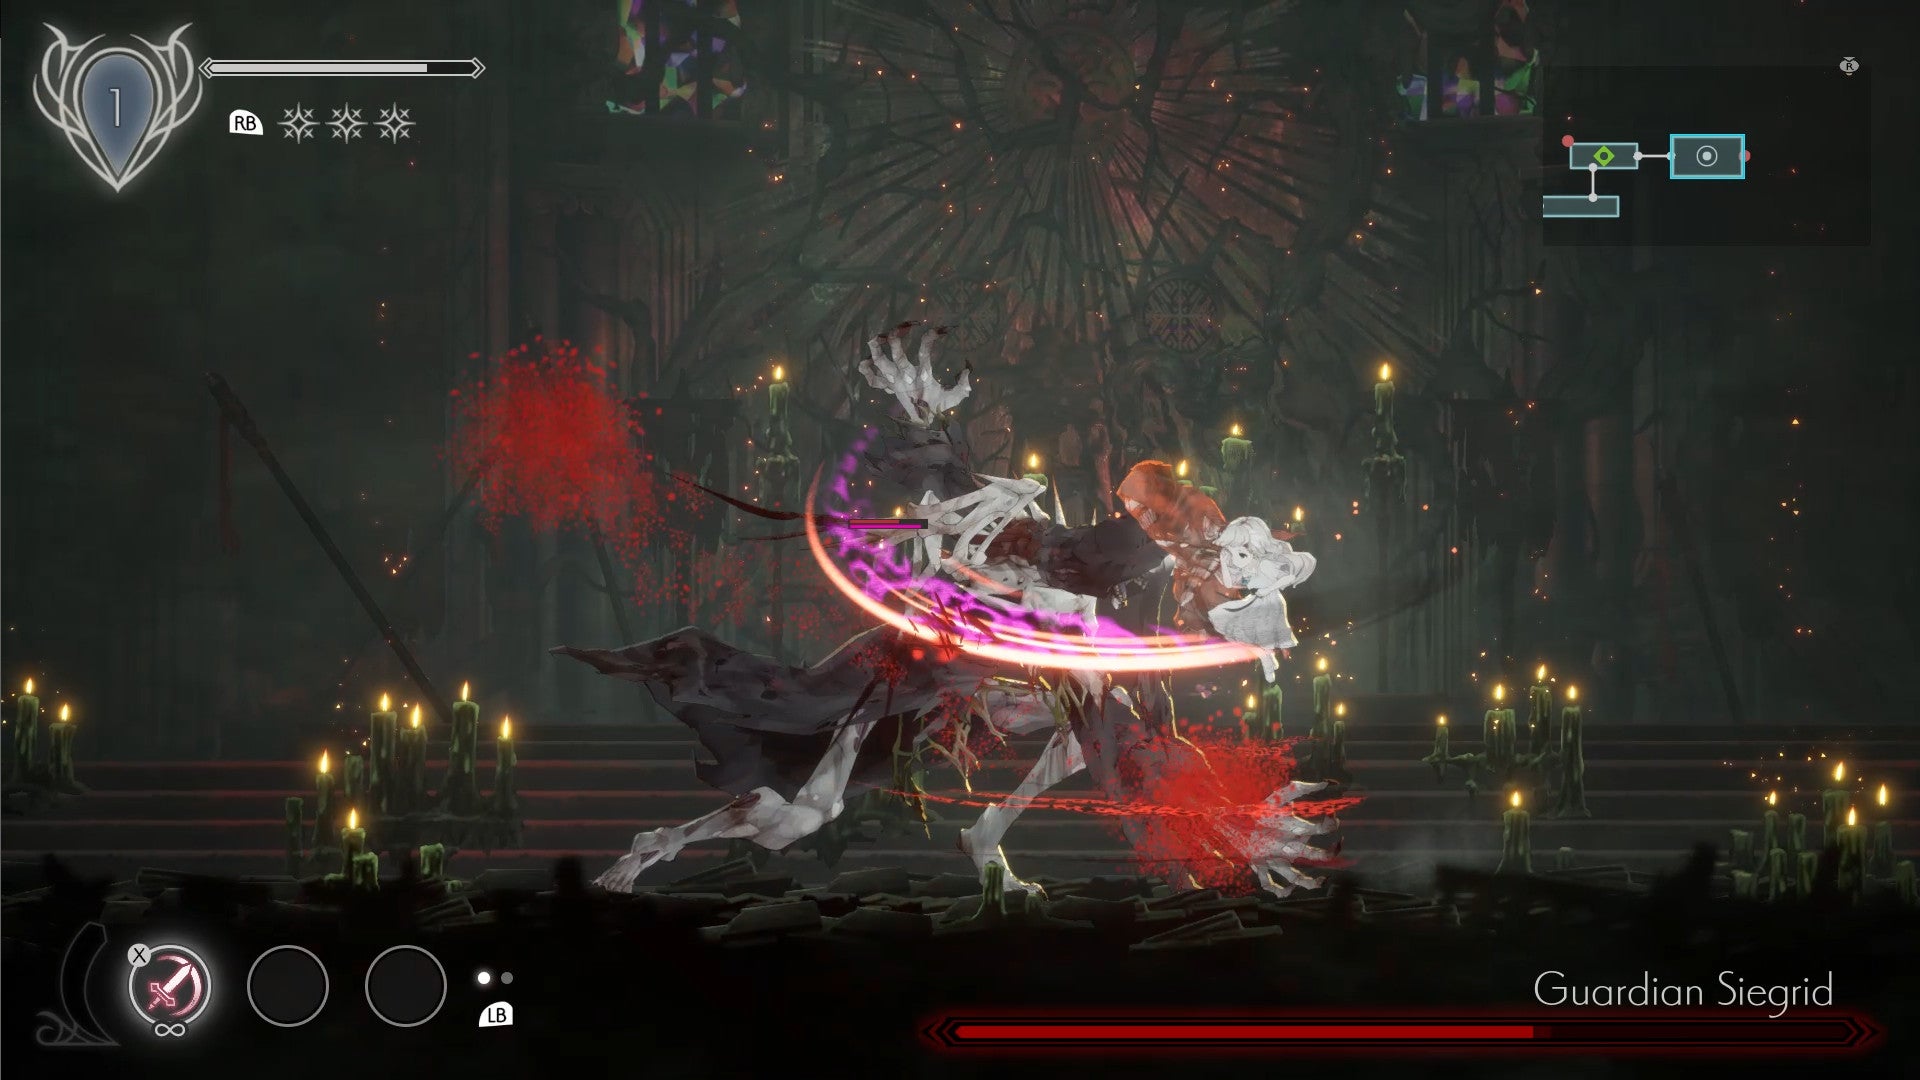 Ender Lilies - Lily attacking a boss called Guardian Siegrid with the sword slashing skill of one of her spirits.